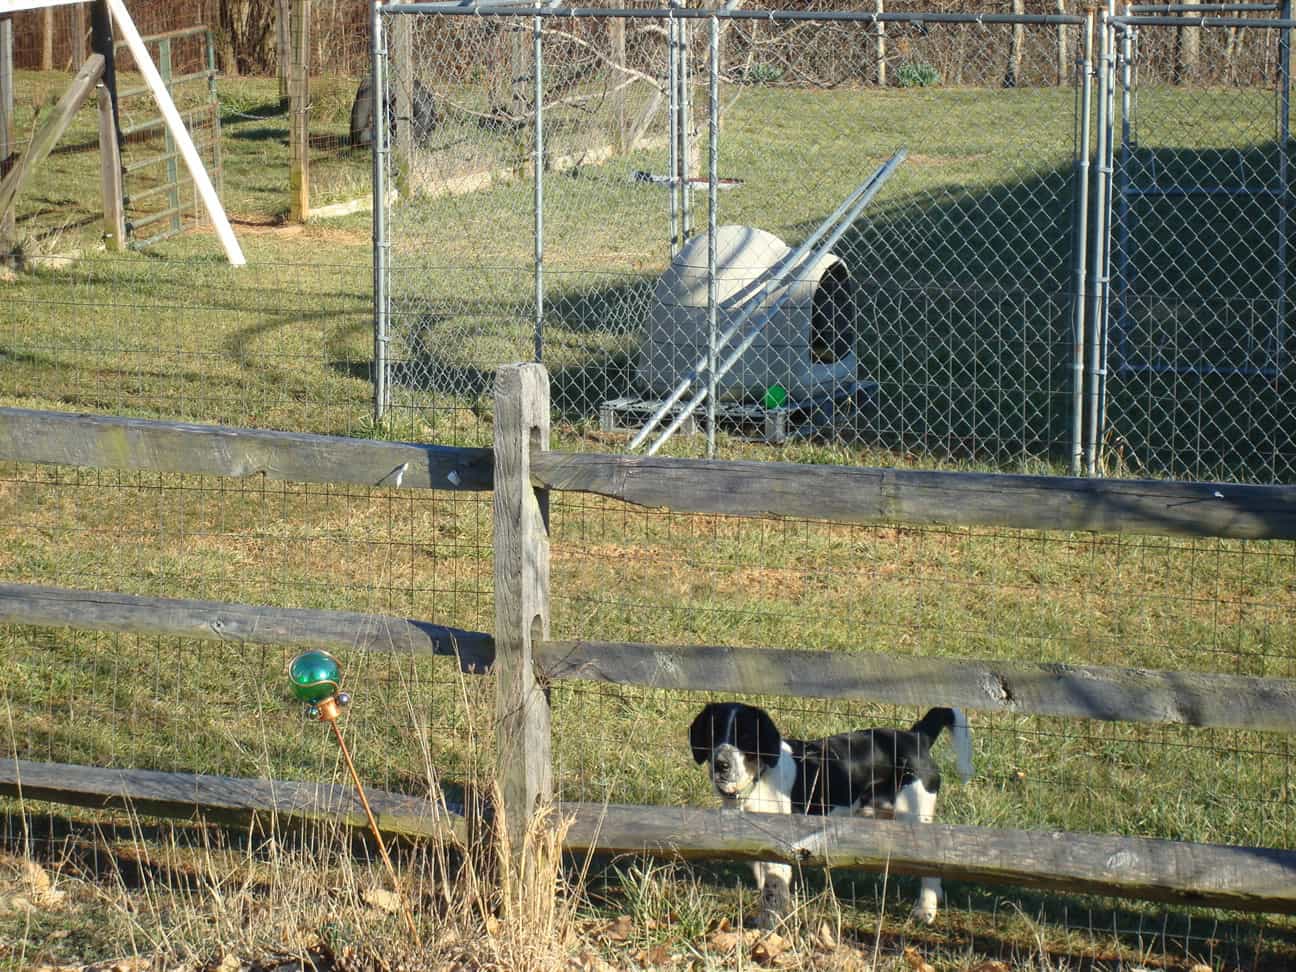 The Meads and Buddy’s Play-Yard